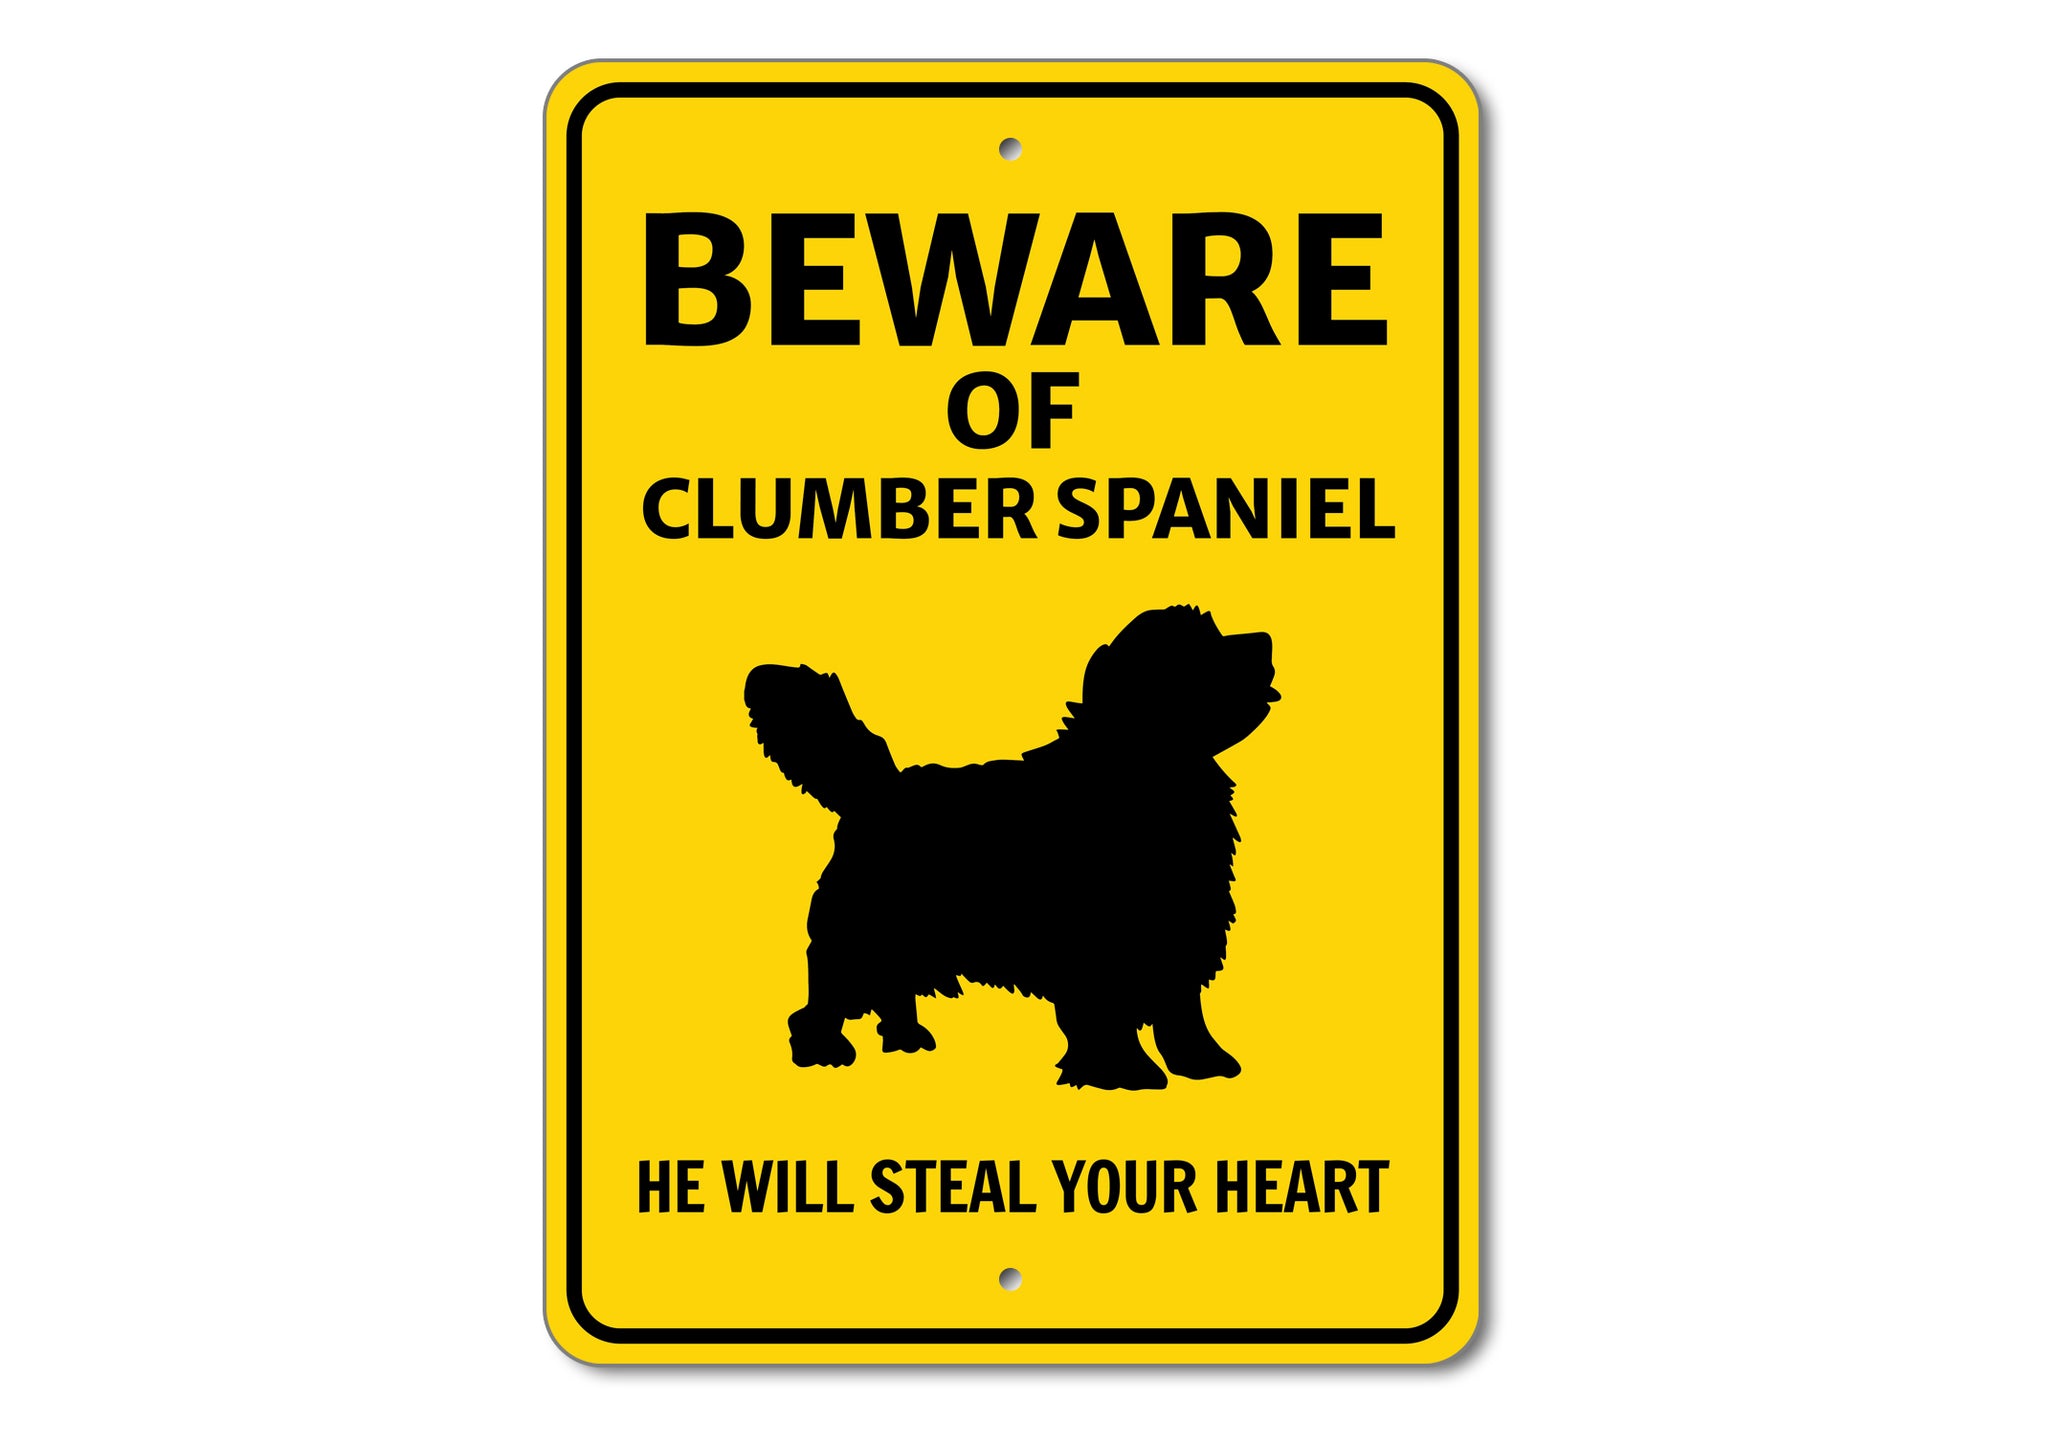 Beware He Will Steal Your Heart K9 Sign - Dog Names Starting with "C"